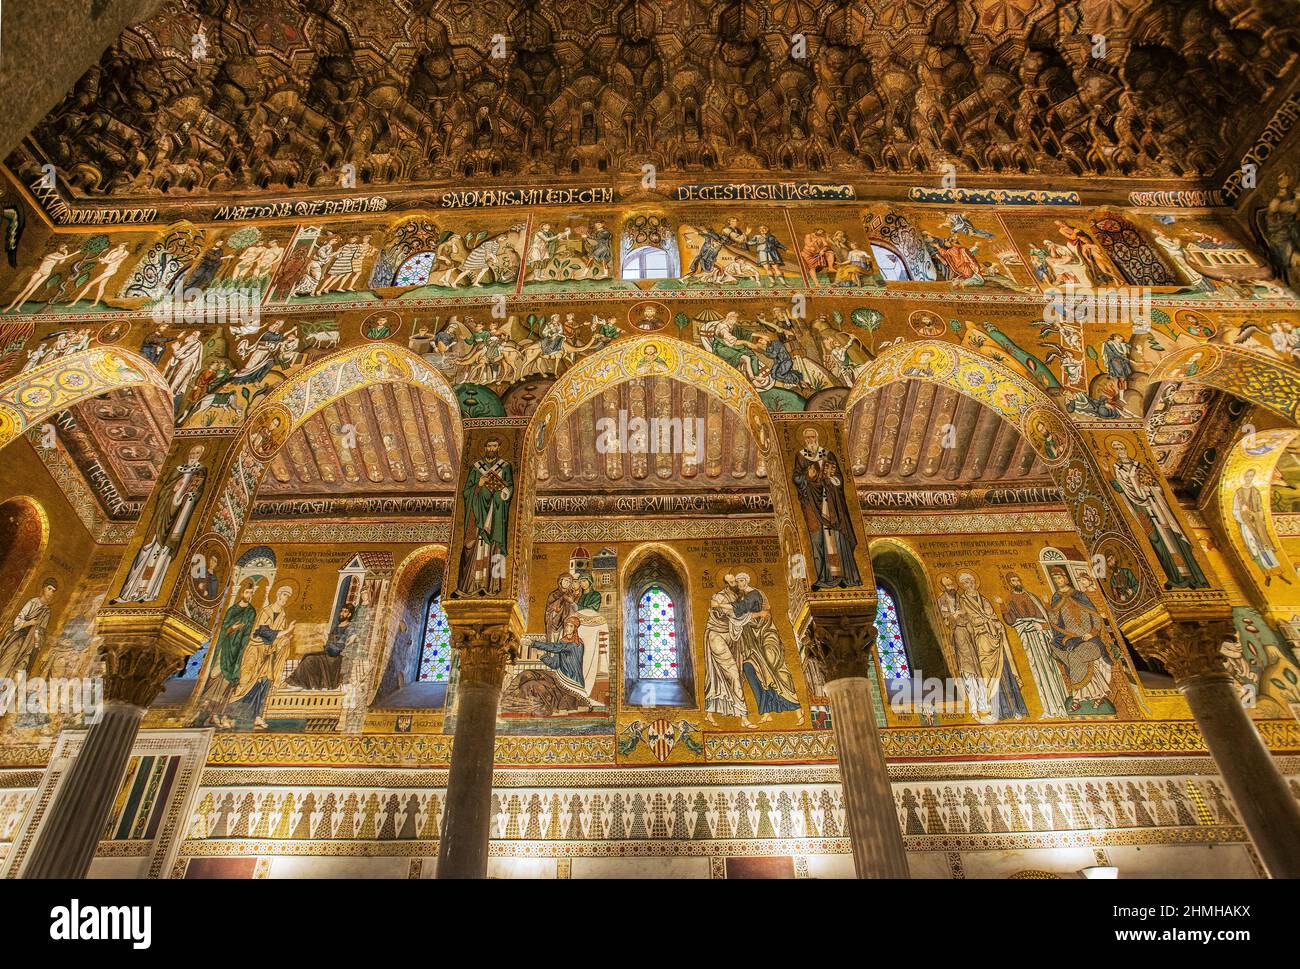 Cappella Palatina (Palatine Chapel) with magnificent gold mosaics and stalactite ceiling in the Palazzo Reale (Palazzo dei Normanni), Palermo, Sicily, Italy Stock Photo